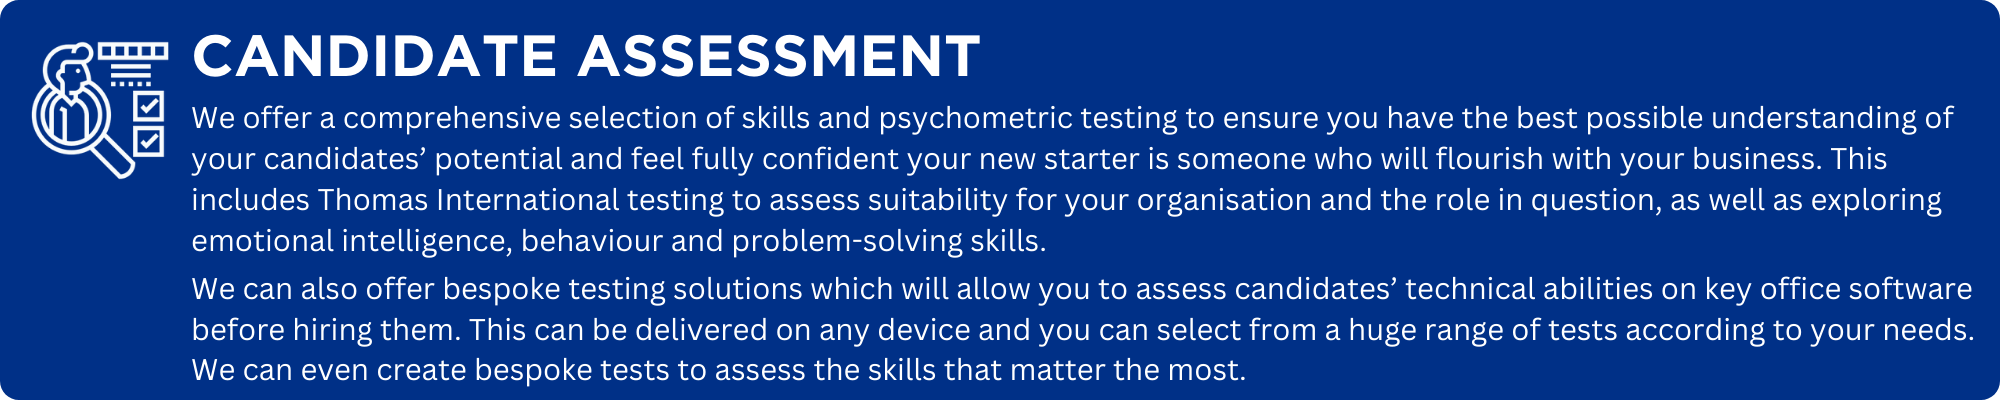 Candidate Assessment